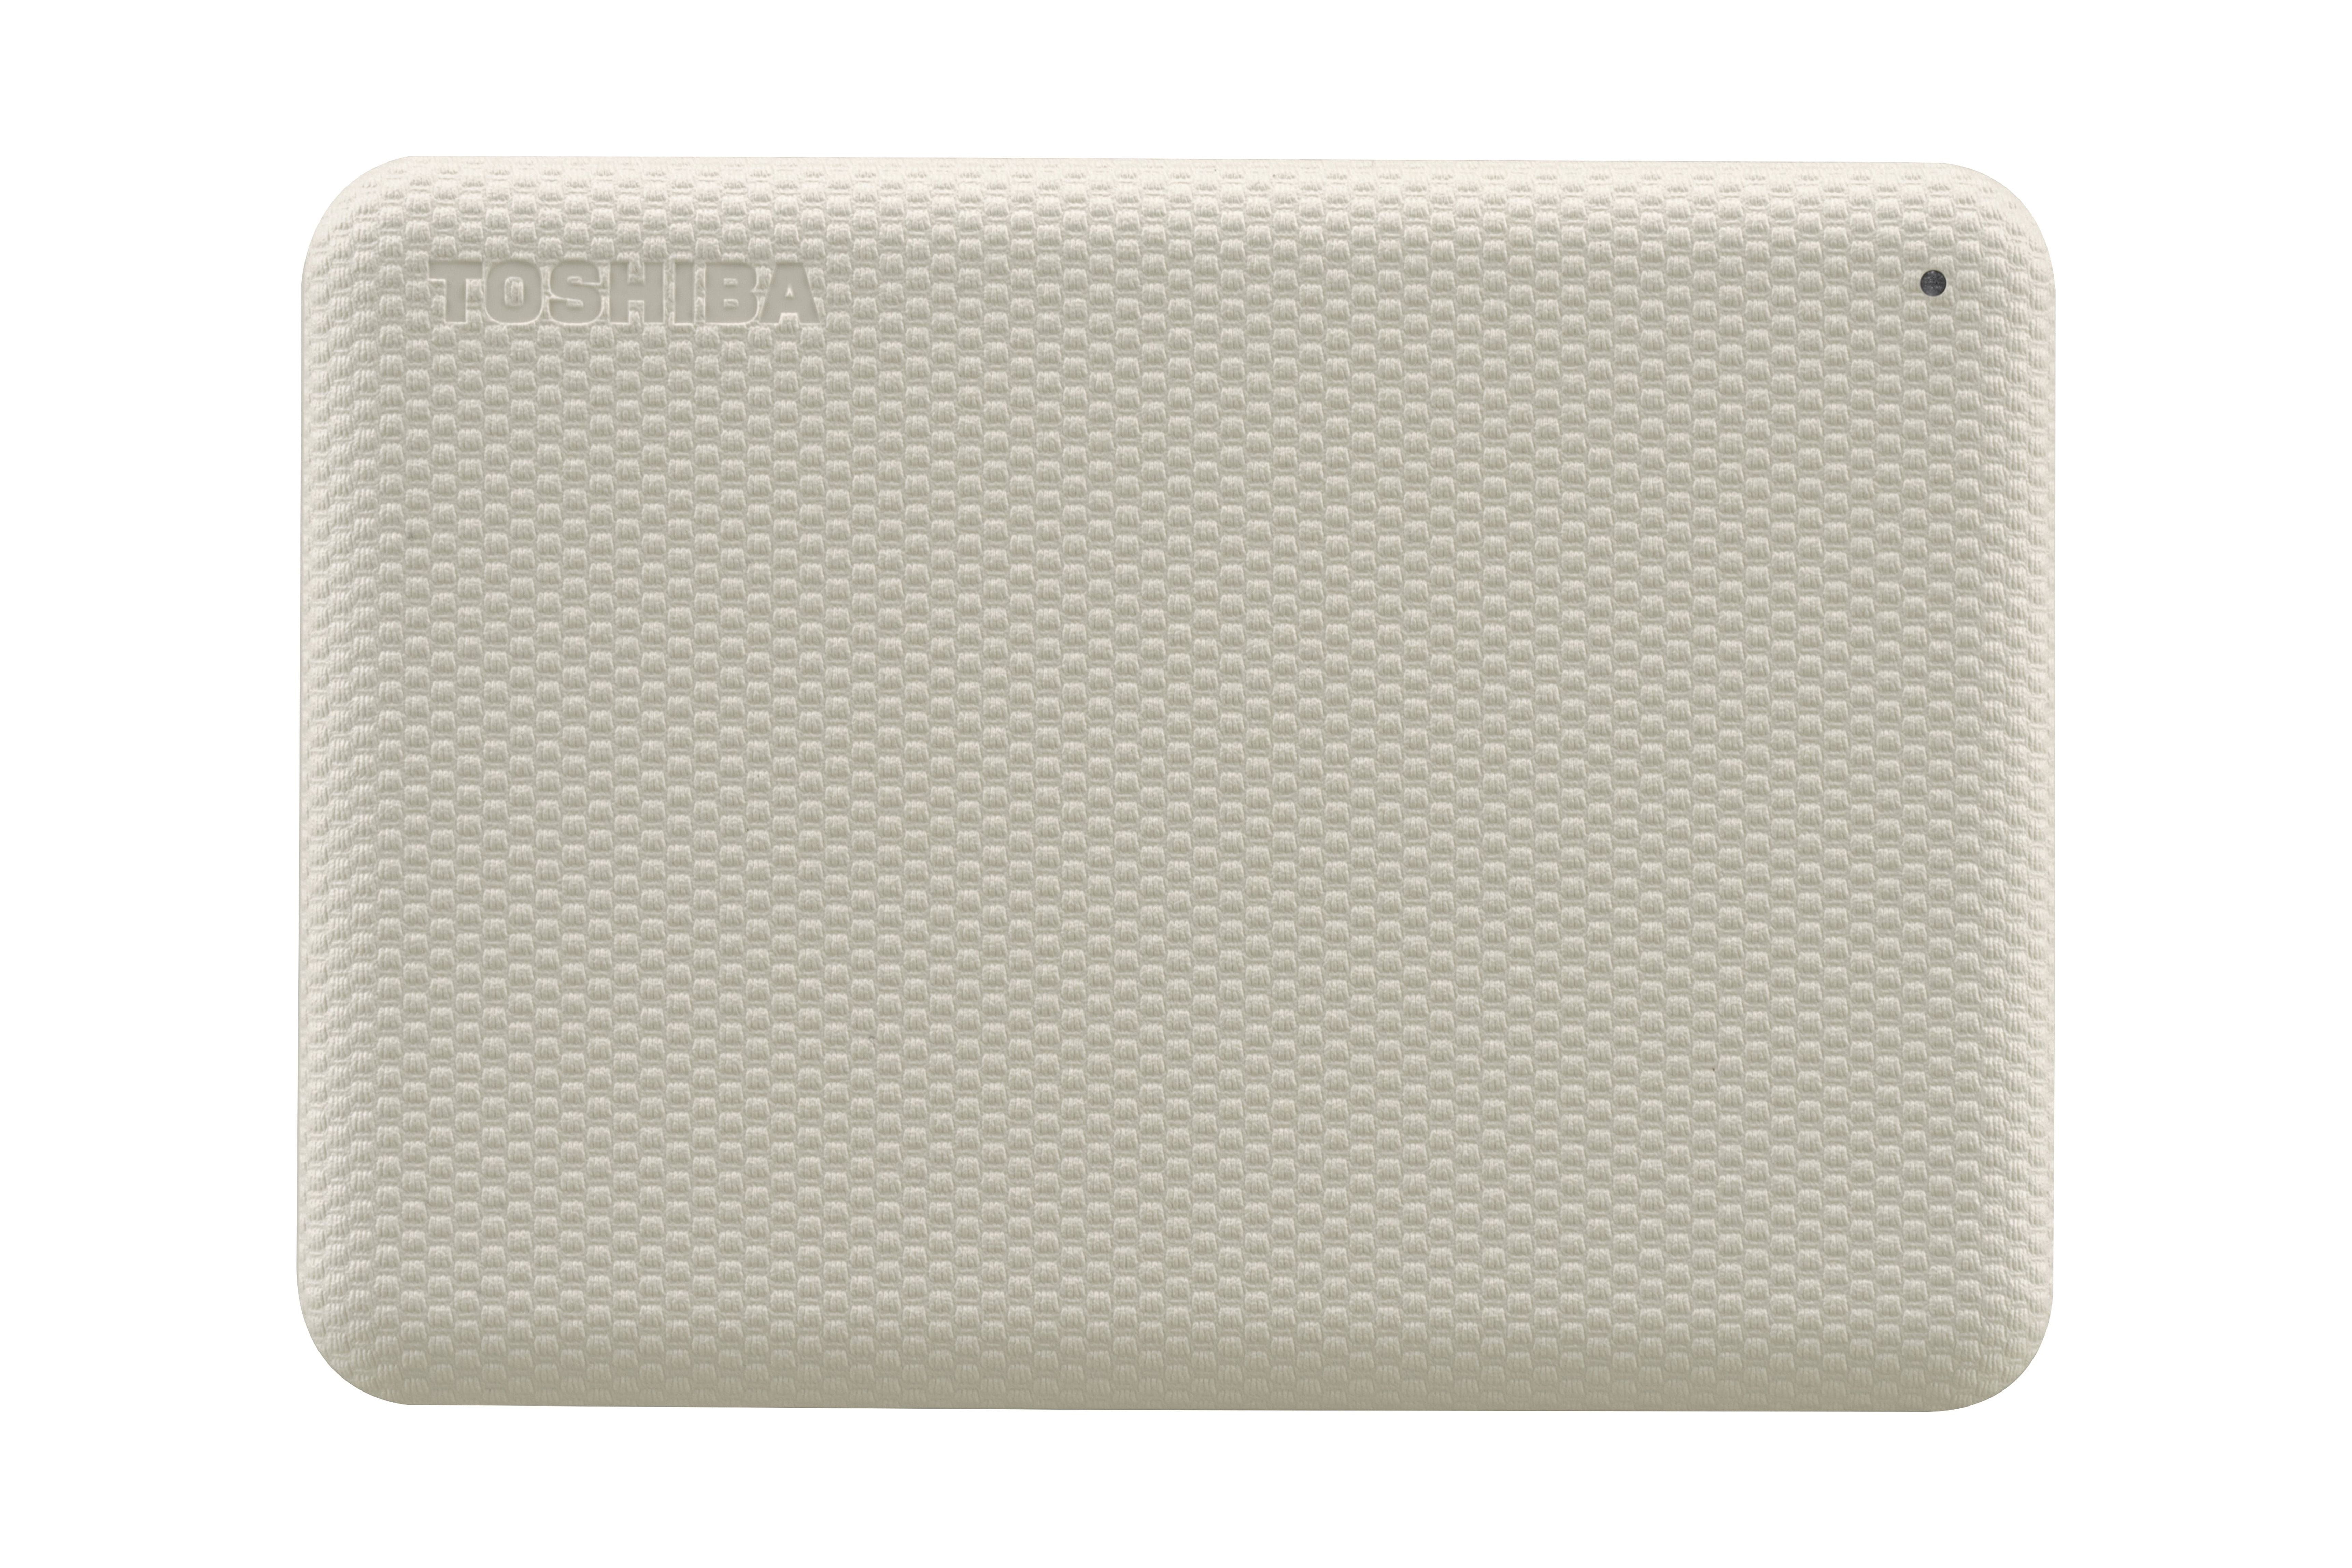 Advance - USB-C USB both Toshiba Portable Hard CANVIO 2TB External Plus White Drive (Includes Cables) - USB-A 3.0 and